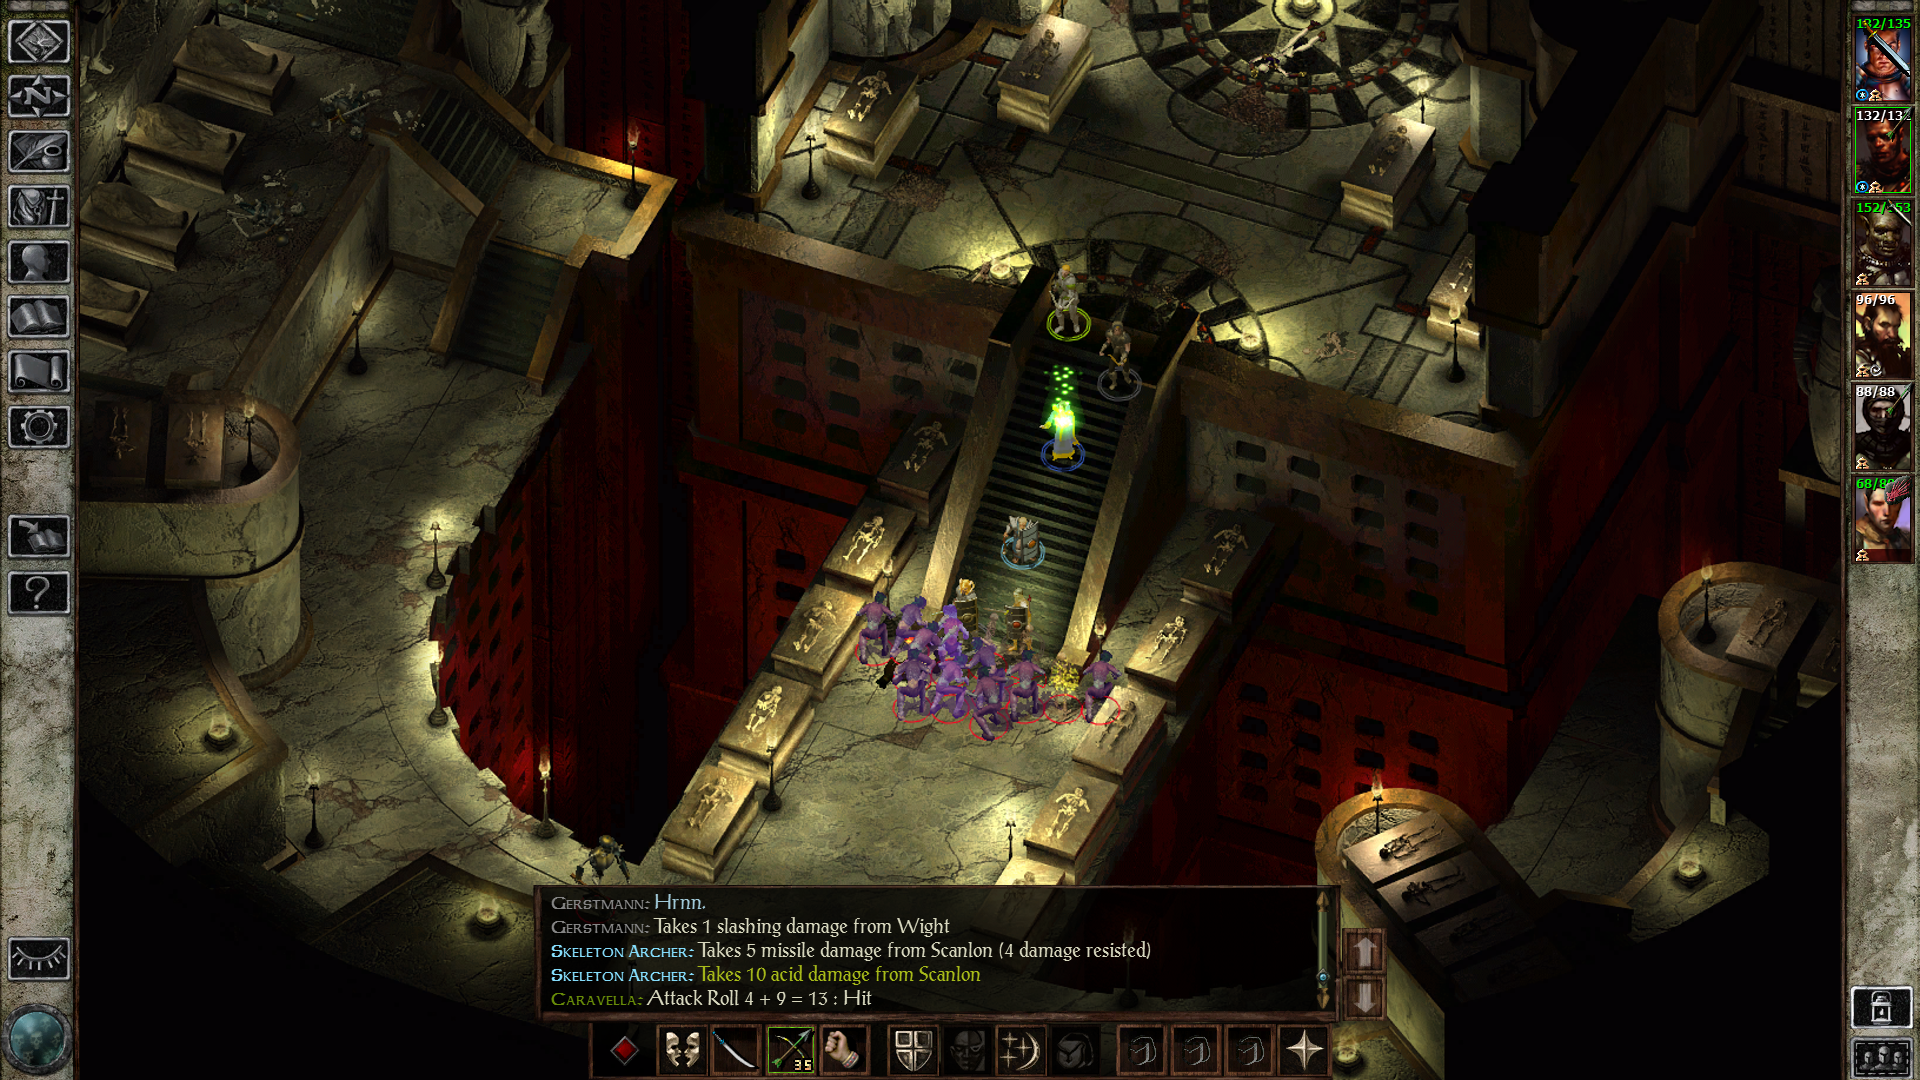 Icewind Dale: Enhanced Edition will be out this month